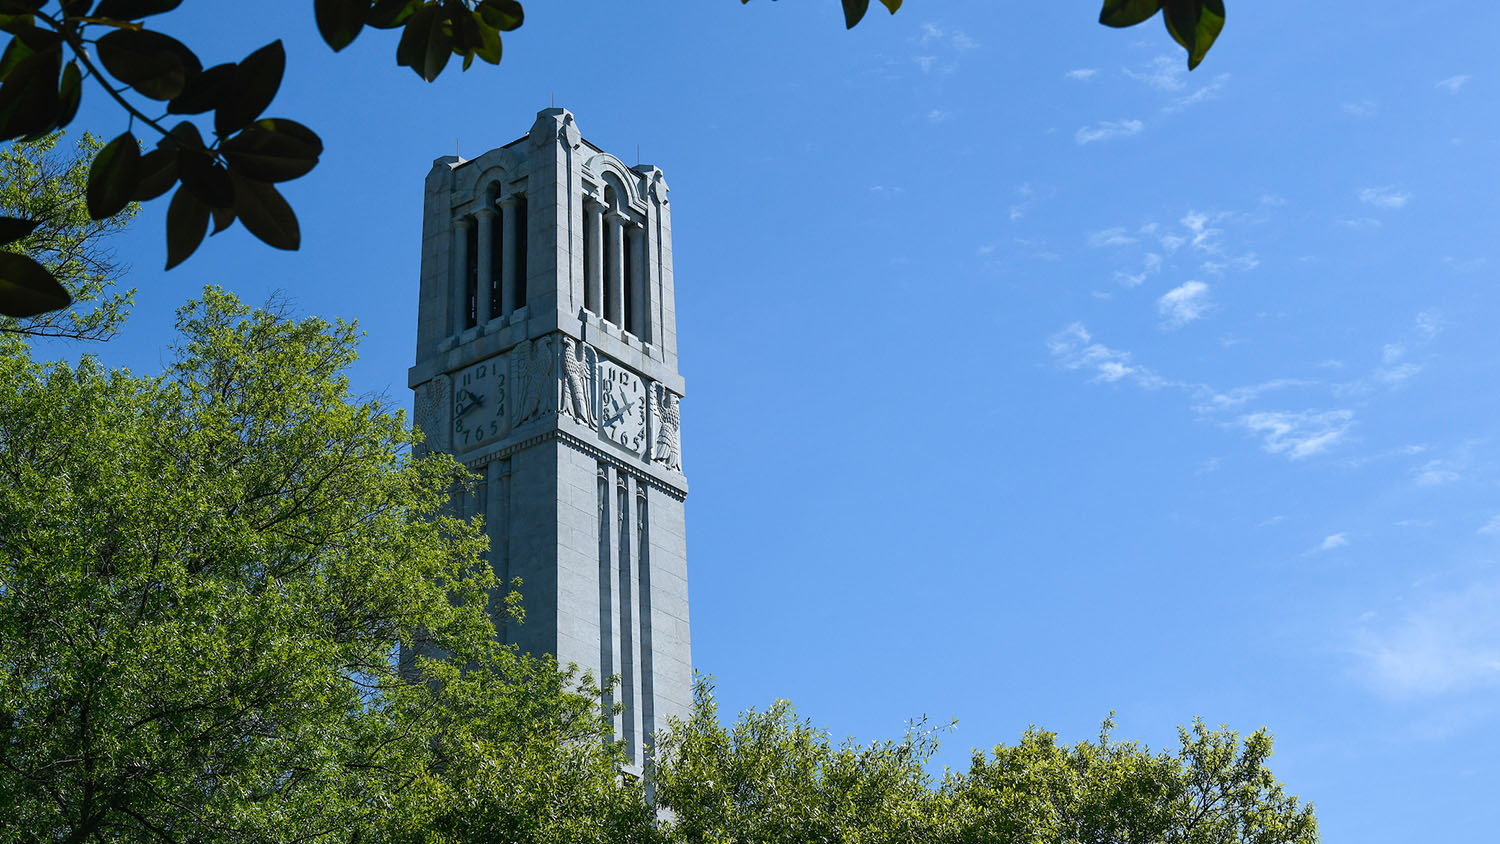 The NC&#160;State belltower, framed against a clear sky.